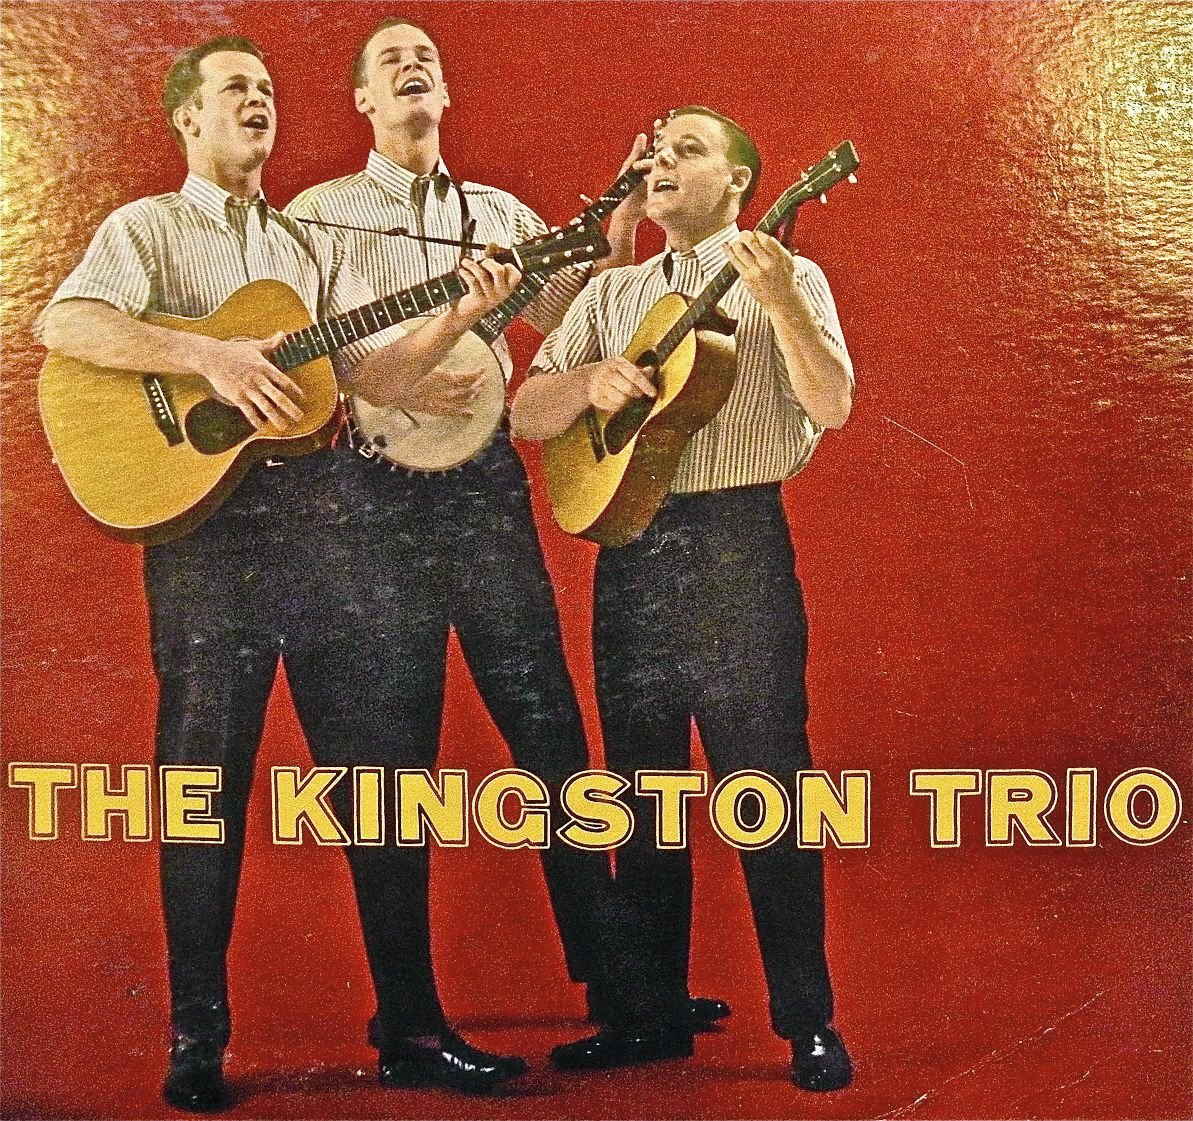 How The Kingston Trio Revived Folk Music And Got America Singing